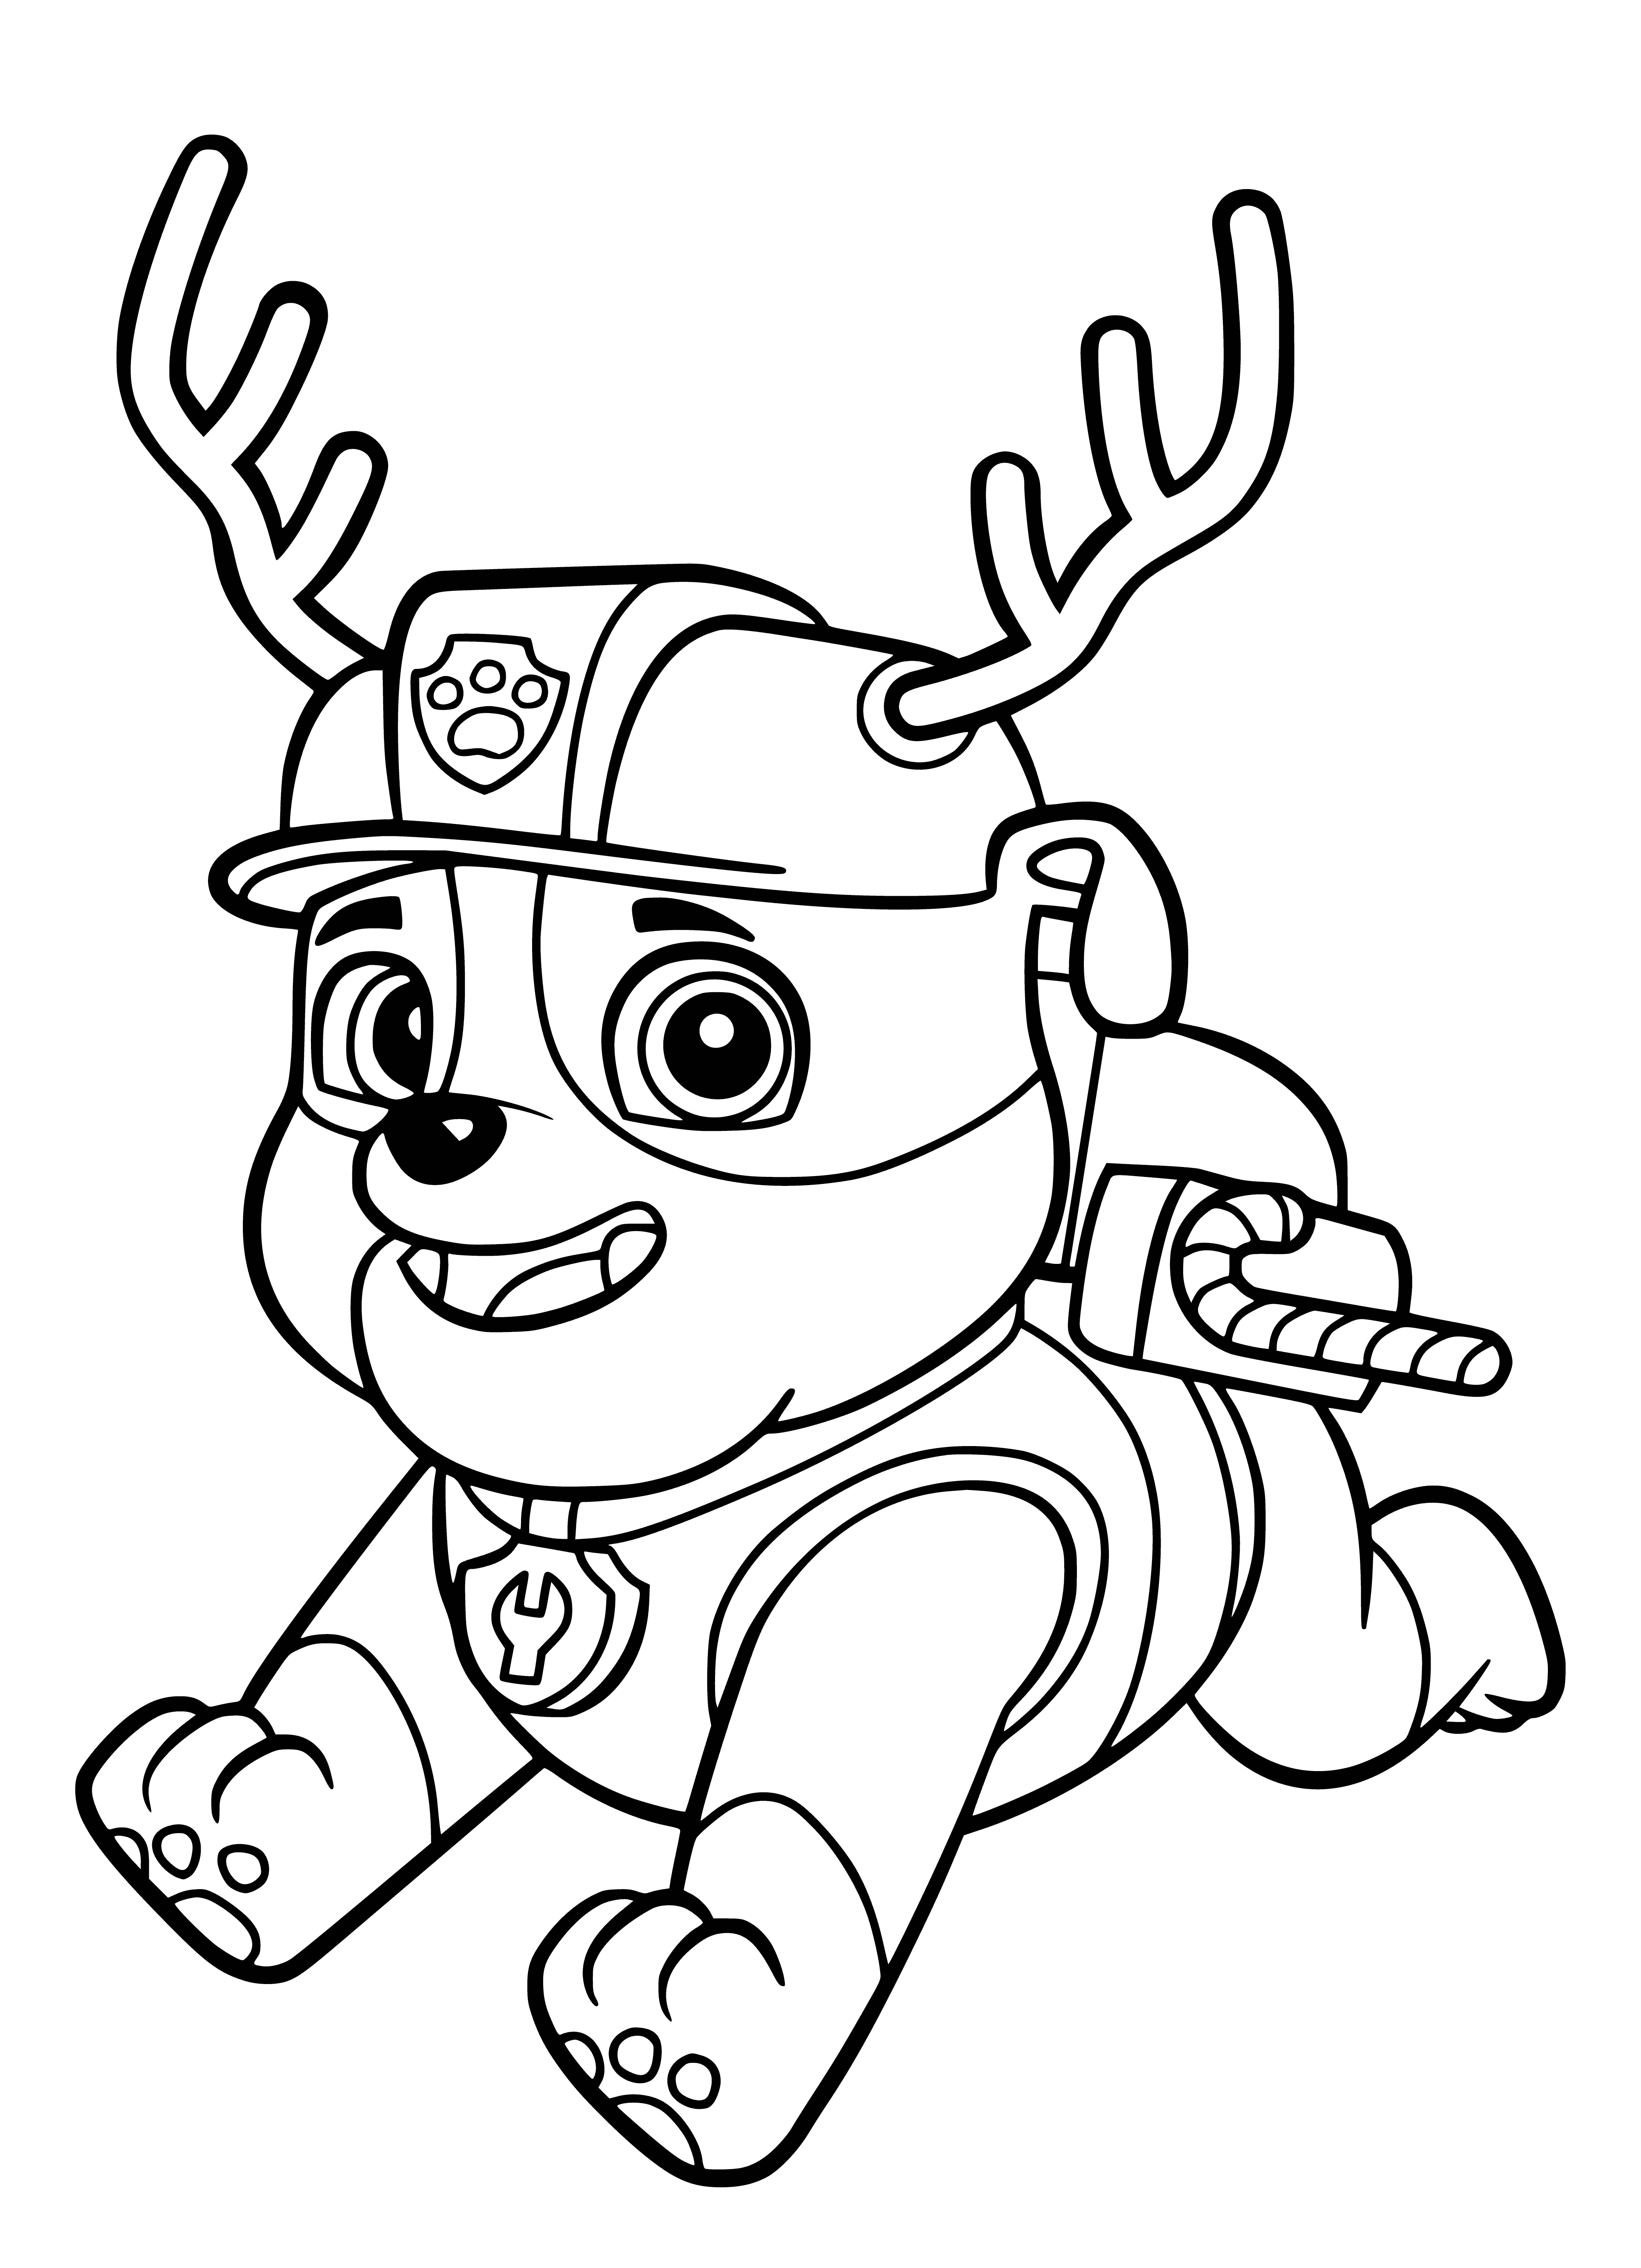 coloring page: Meet the PAW Patrol: A group of heroic pups who protect Adventure Bay with cool vehicles & gear! #PAWPatrol